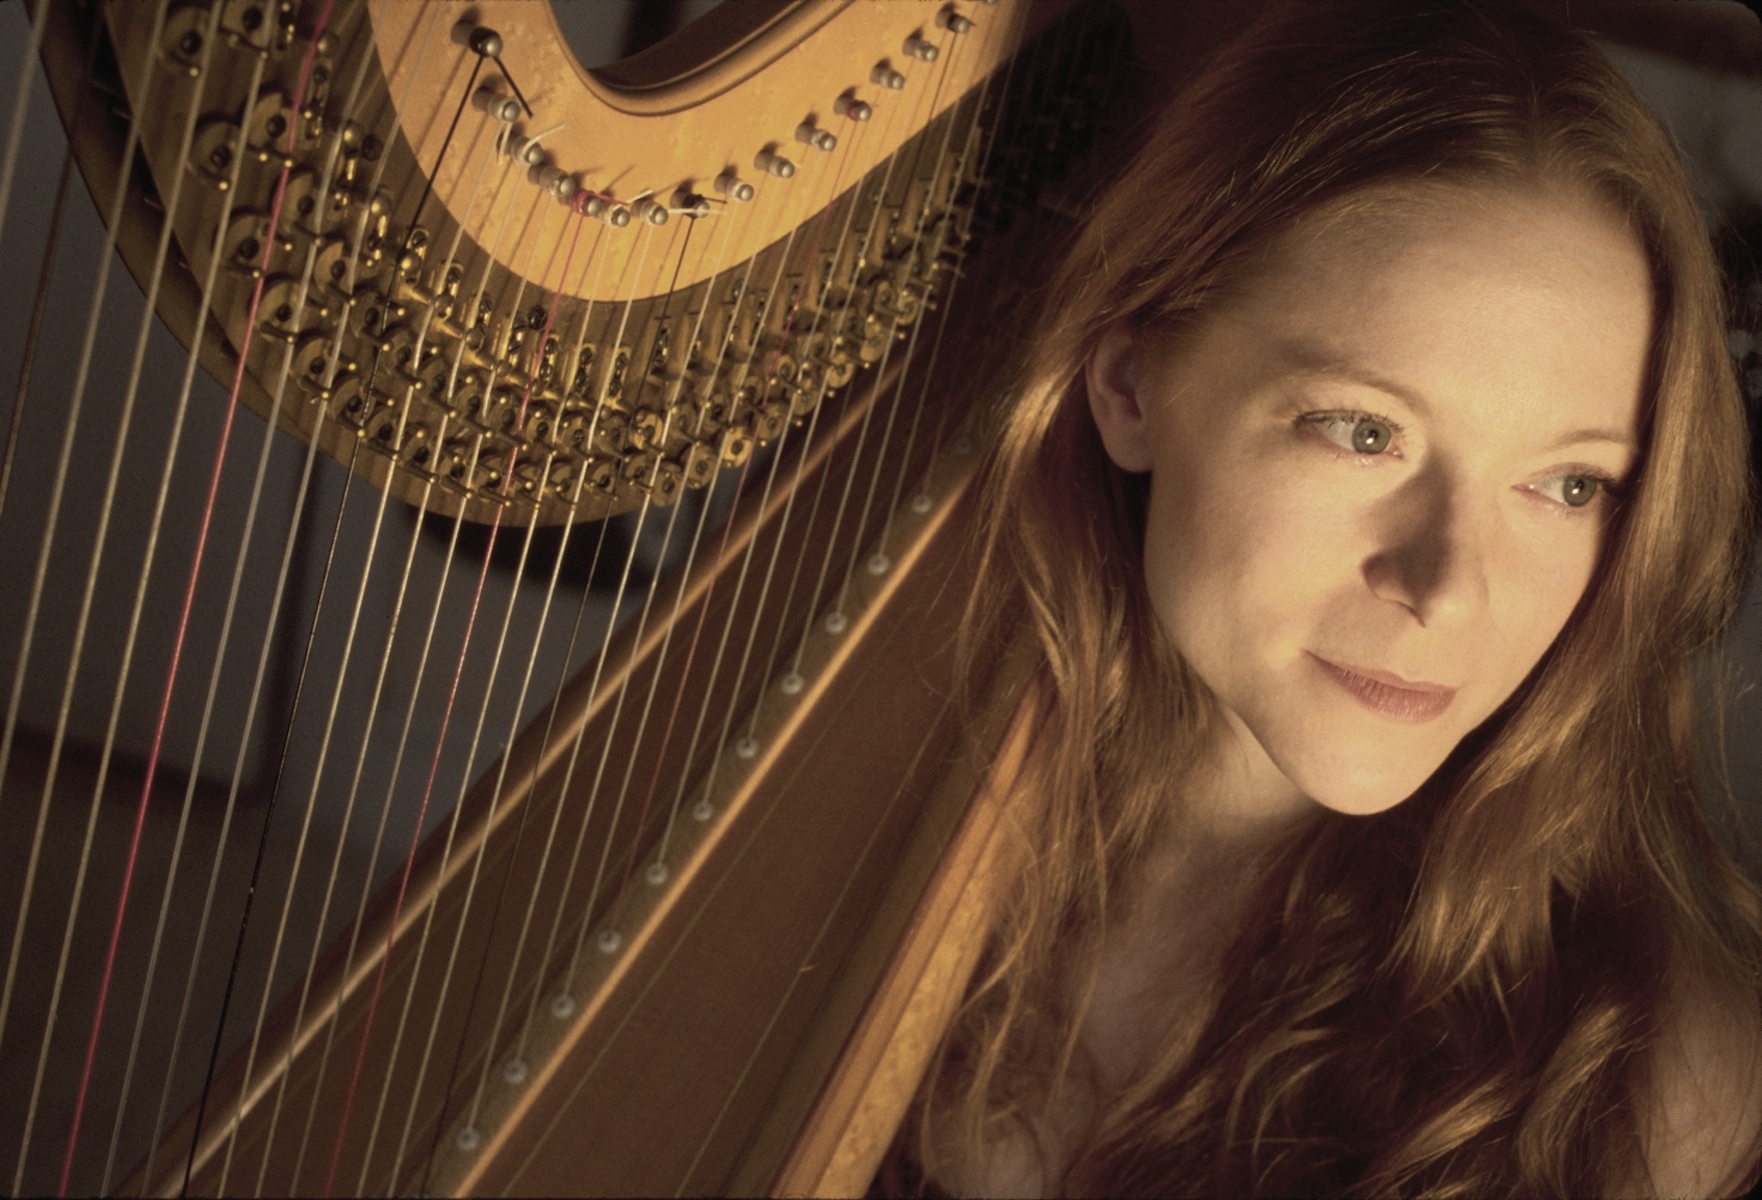 Erin Hill & Her Psychedelic Harp will delight Harborfest audiences with her sci-fi rock & pop originals. The New York-based Hill has toured around the globe and had a #1 Billboard album.